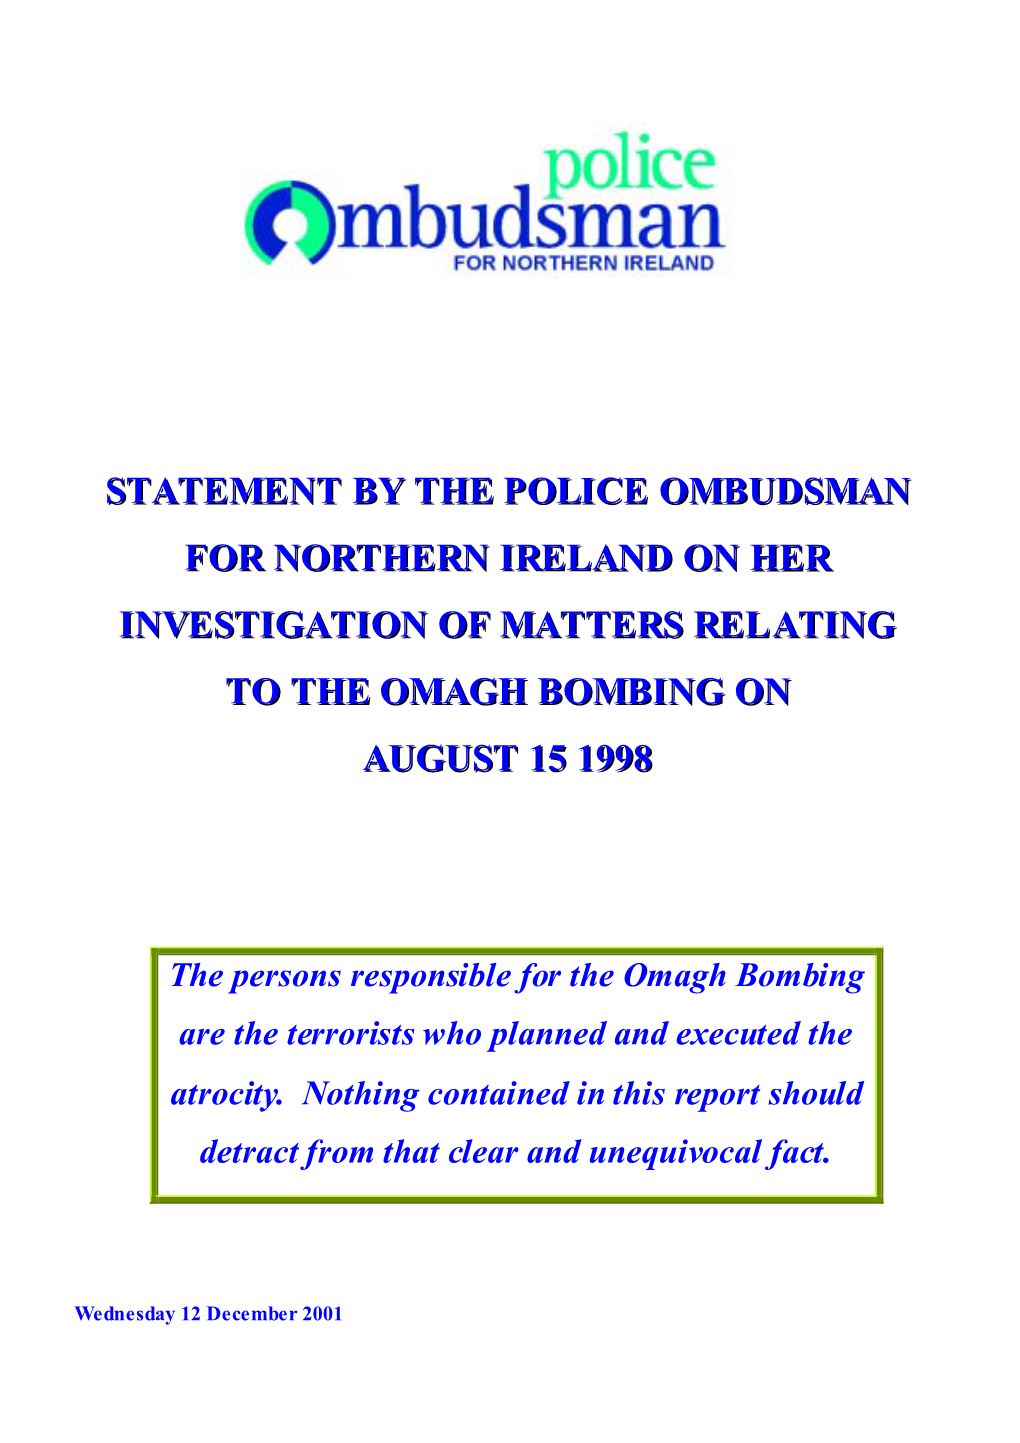 Statement by the Police Ombudsman for Northern